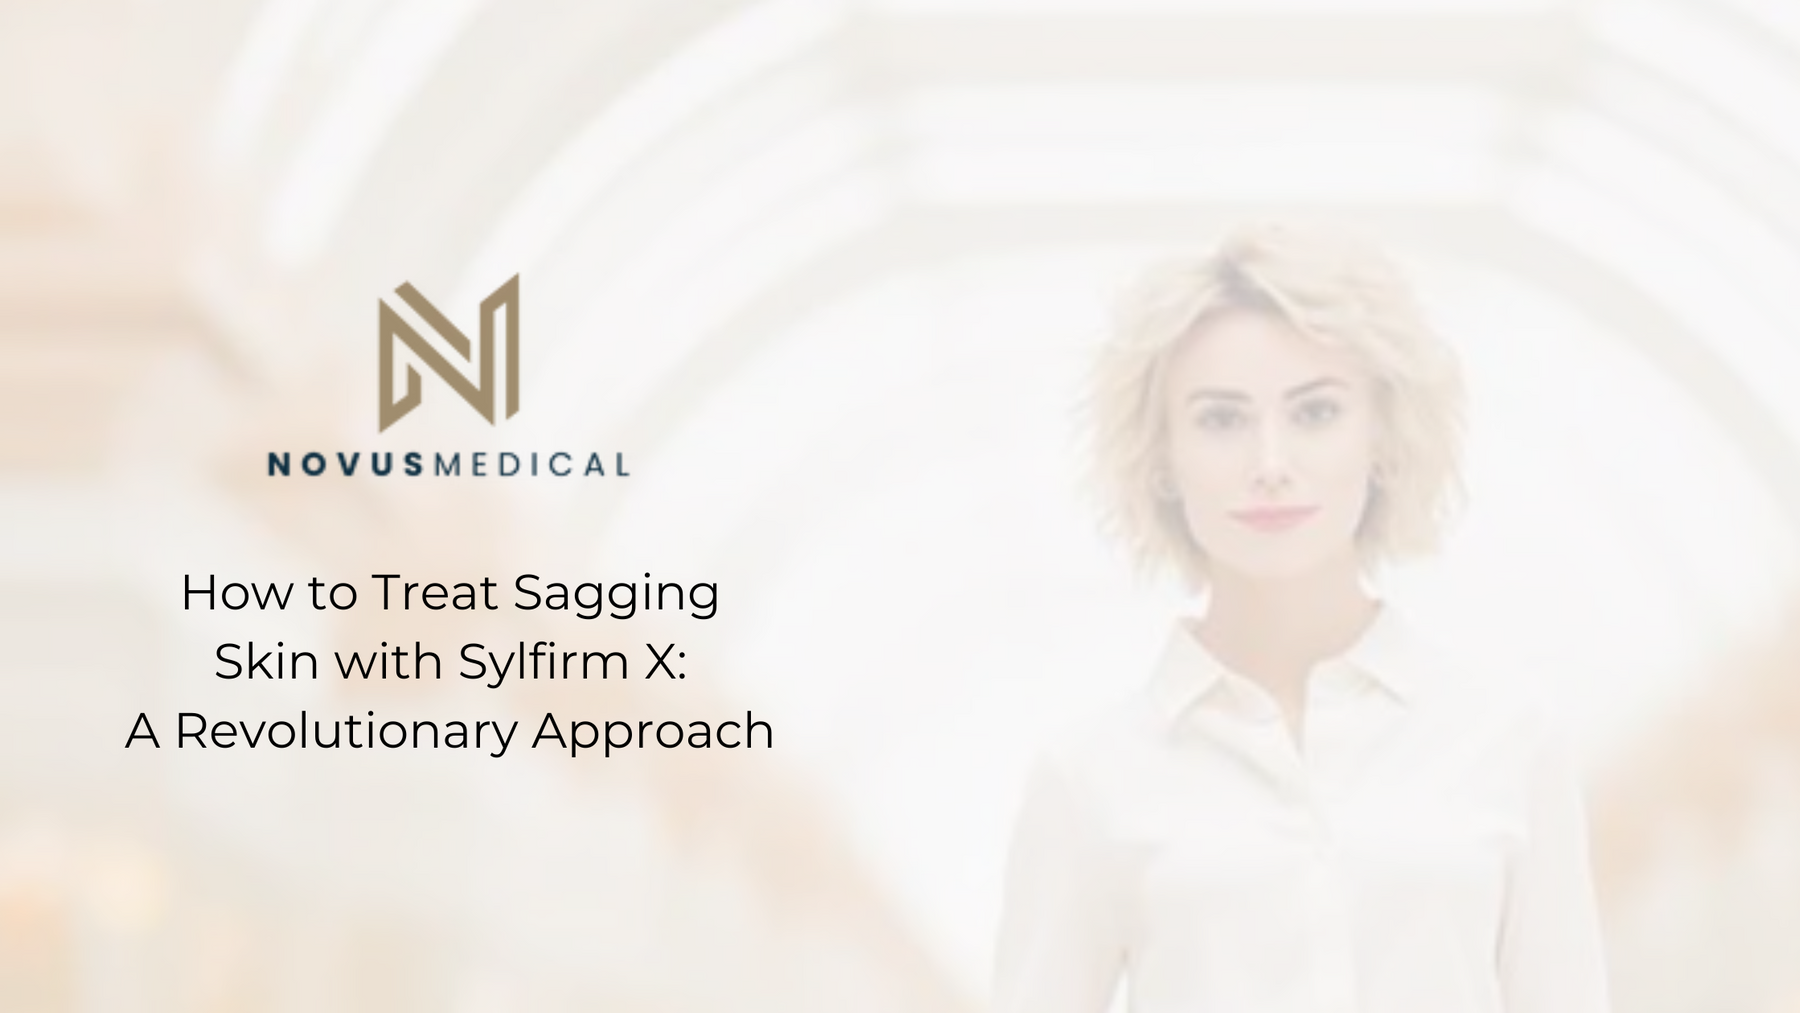 How to Treat Sagging Skin with Sylfirm X A Revolutionary Approach